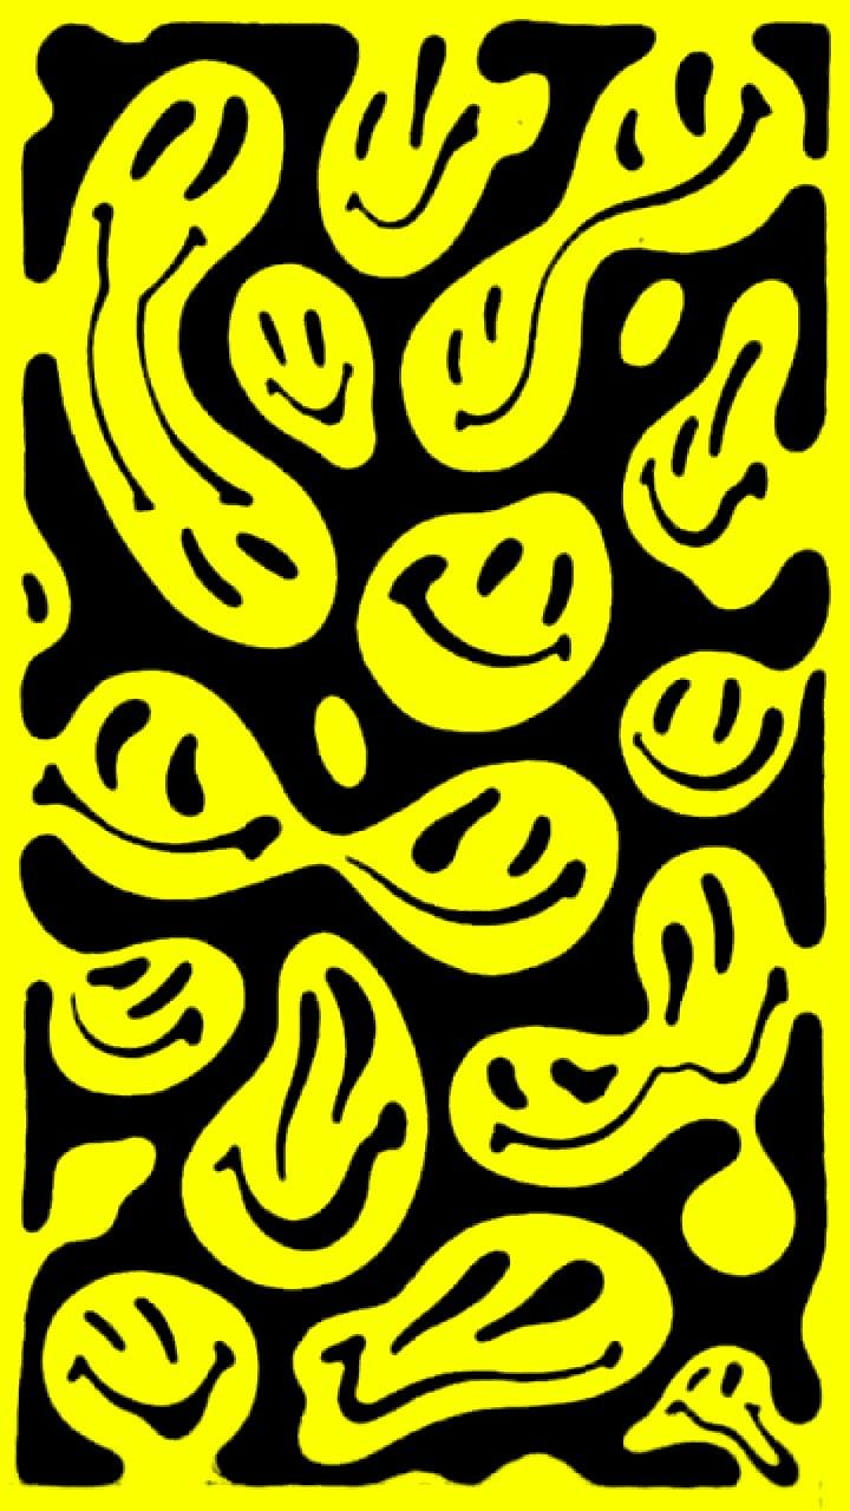 yellow smiles Trippy Retro iphone Edgy [720x1280] for your , Mobile & Tablet, หน้ายิ้มสีเหลือง วอลล์เปเปอร์โทรศัพท์ HD